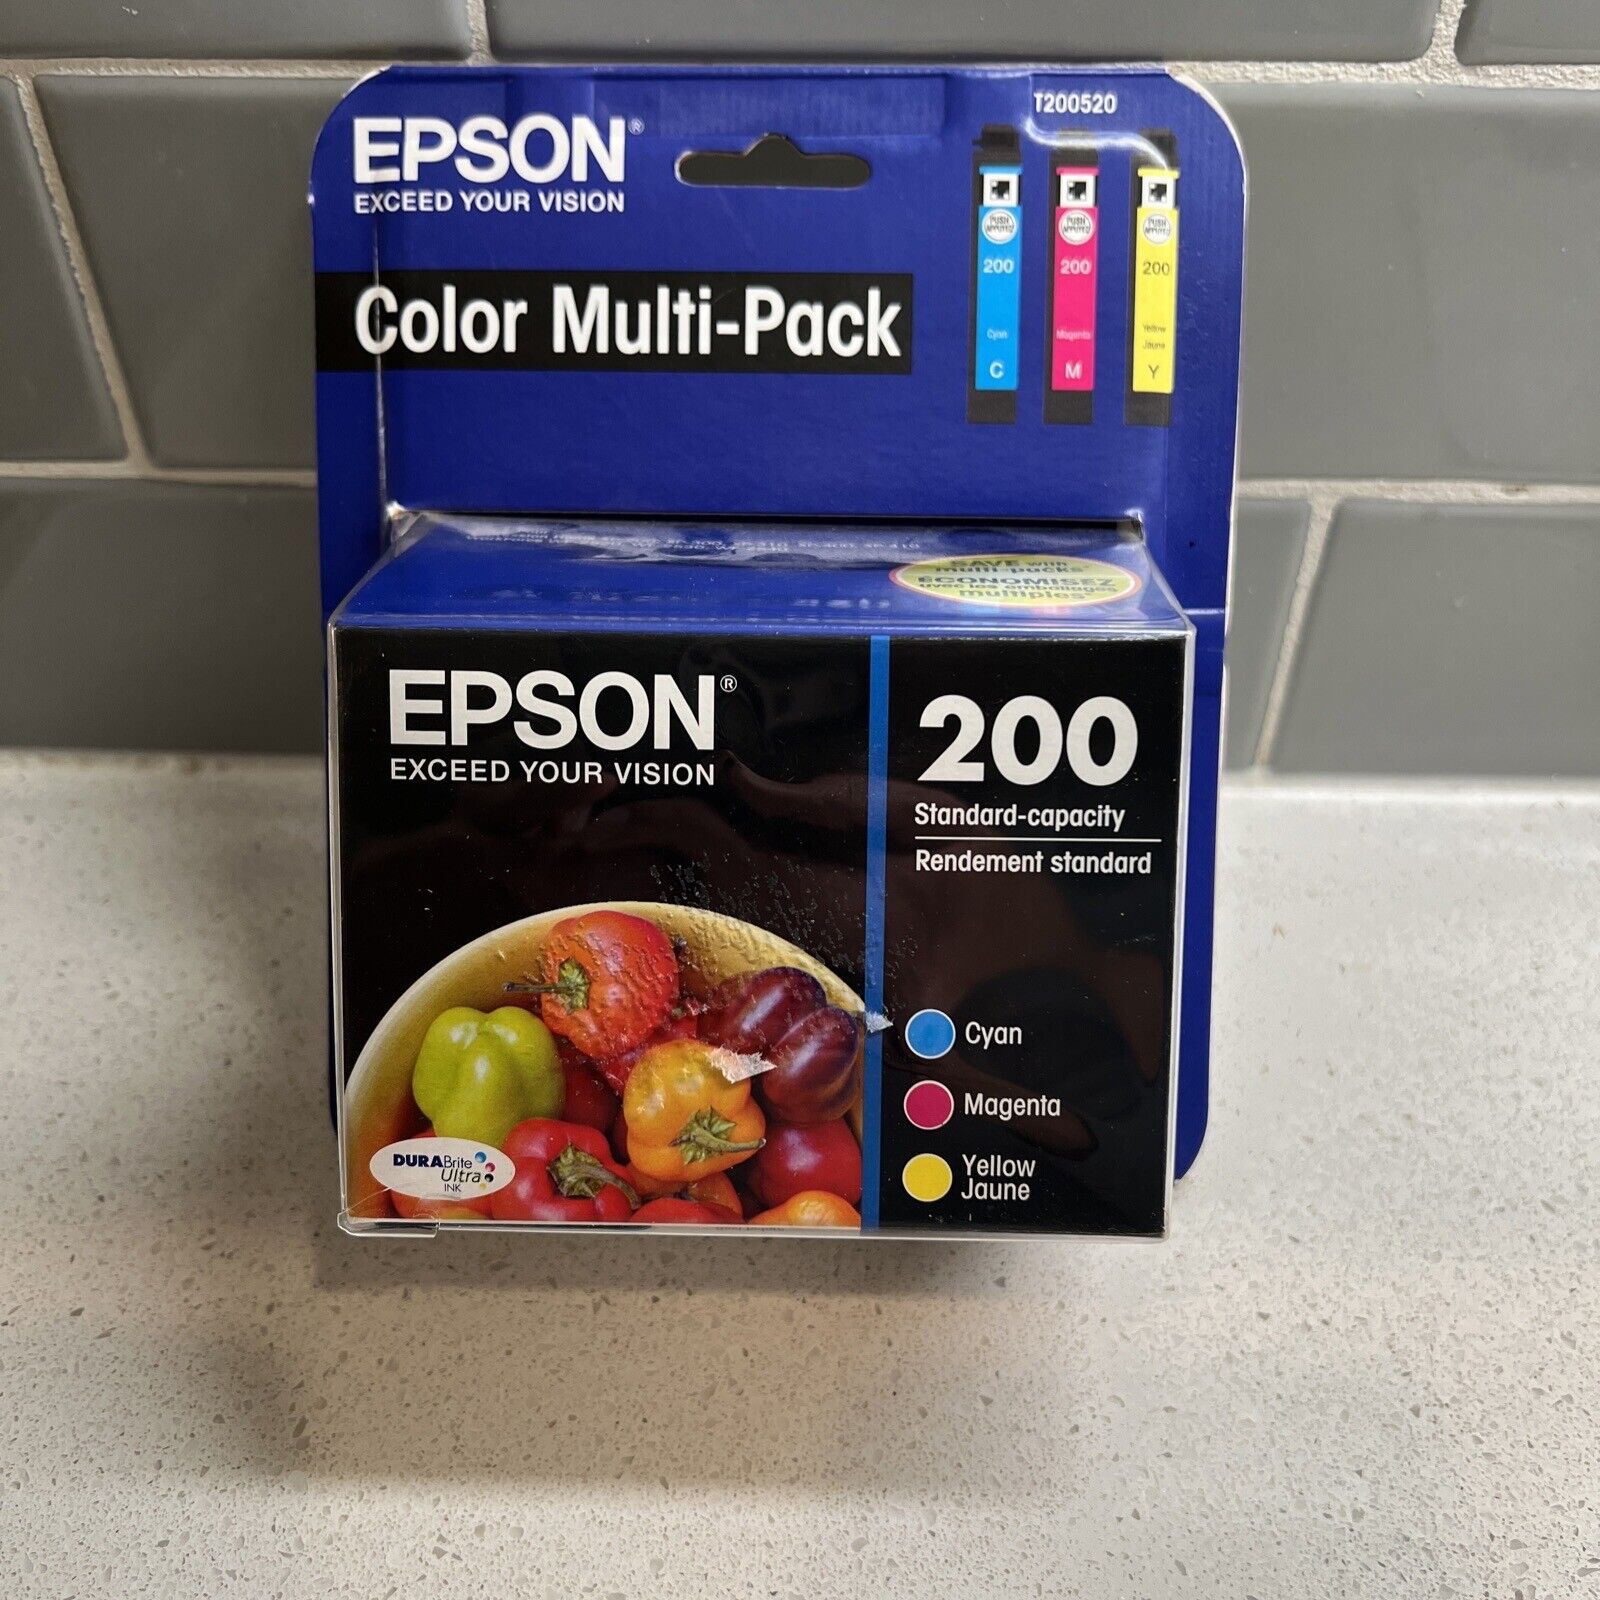 EPSON 200 Color Multi-Pack SEALED (Cyan,Magenta,Yellow) Expired 5/2017 T200520